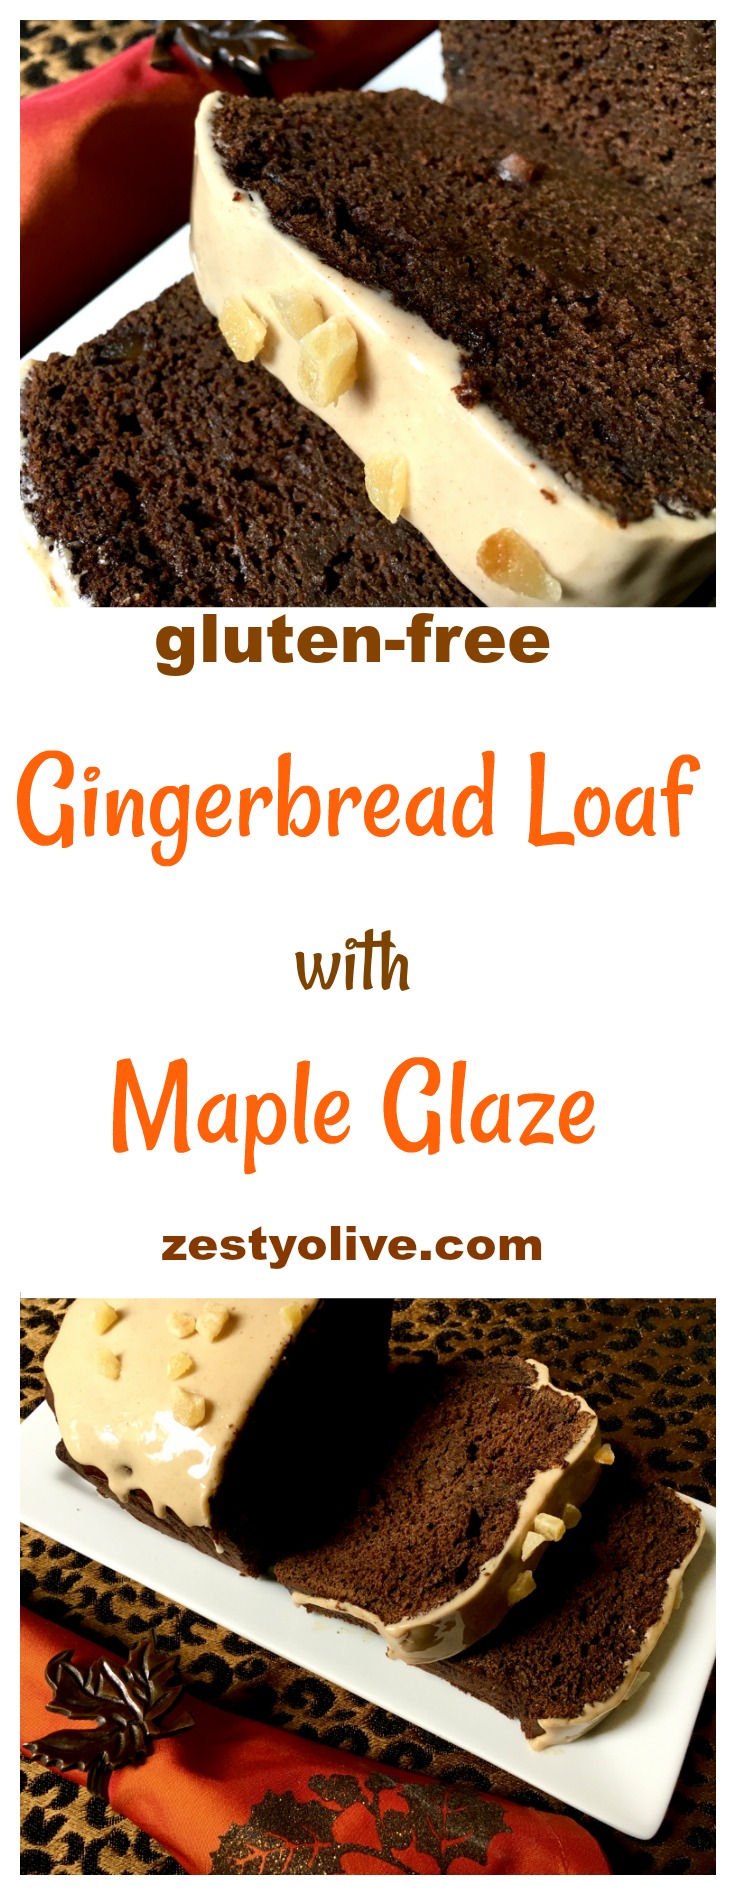 This gluten-free Gingerbread Loaf With Maple Glaze is full of rich molasses and ginger and topped with a maple glaze for a touch of sweetness.